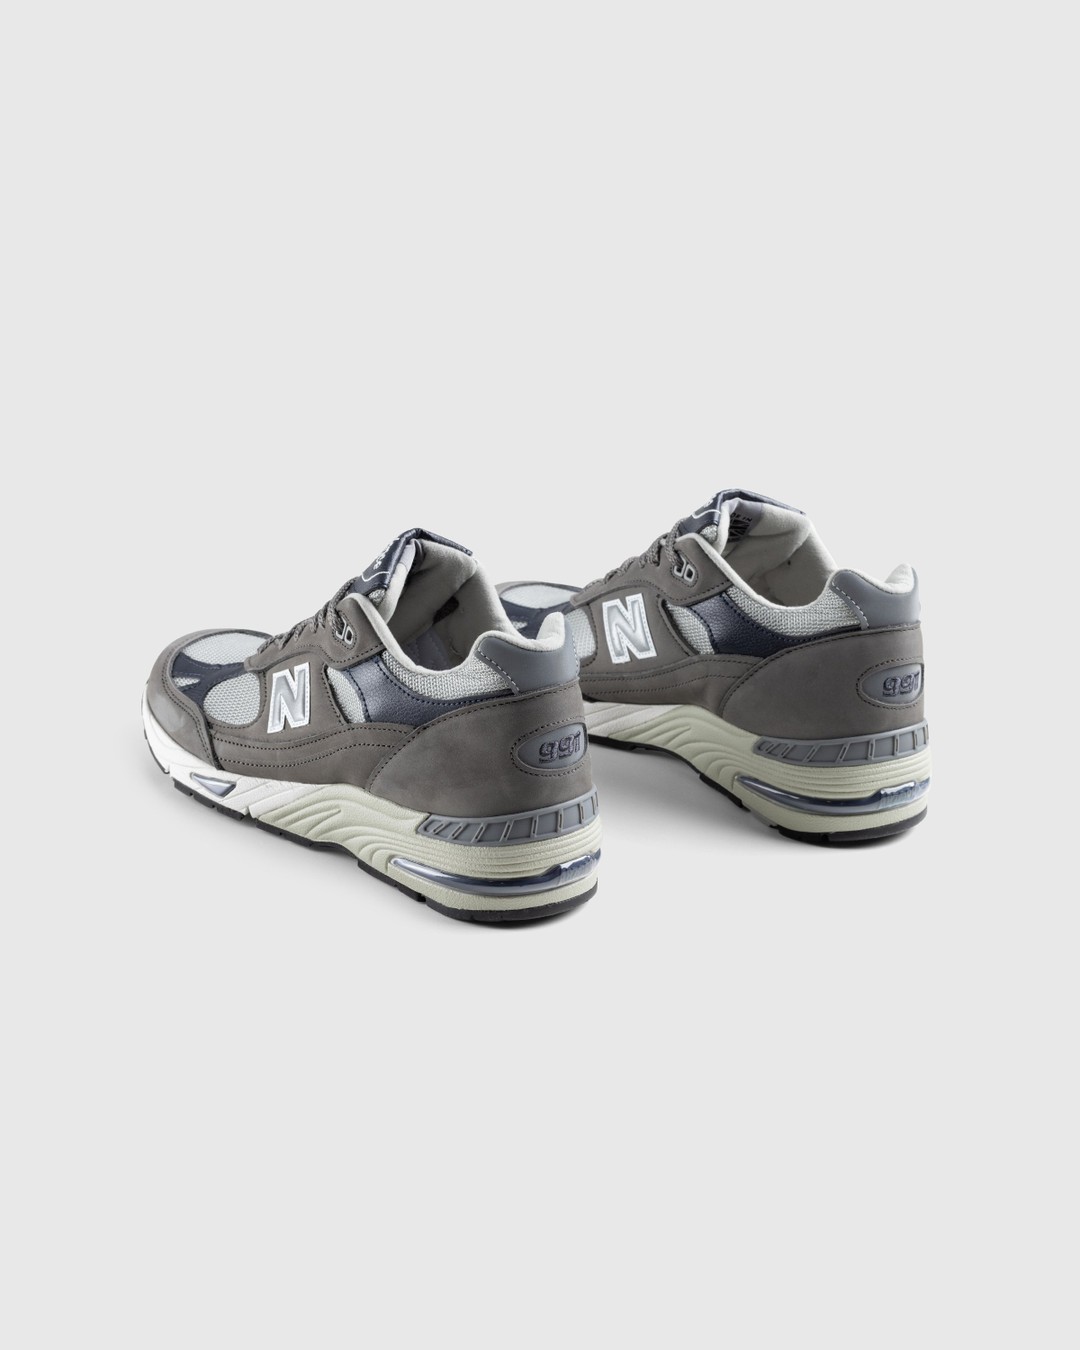 New Balance – M991GNS Grey/Navy - Low Top Sneakers - Grey - Image 4